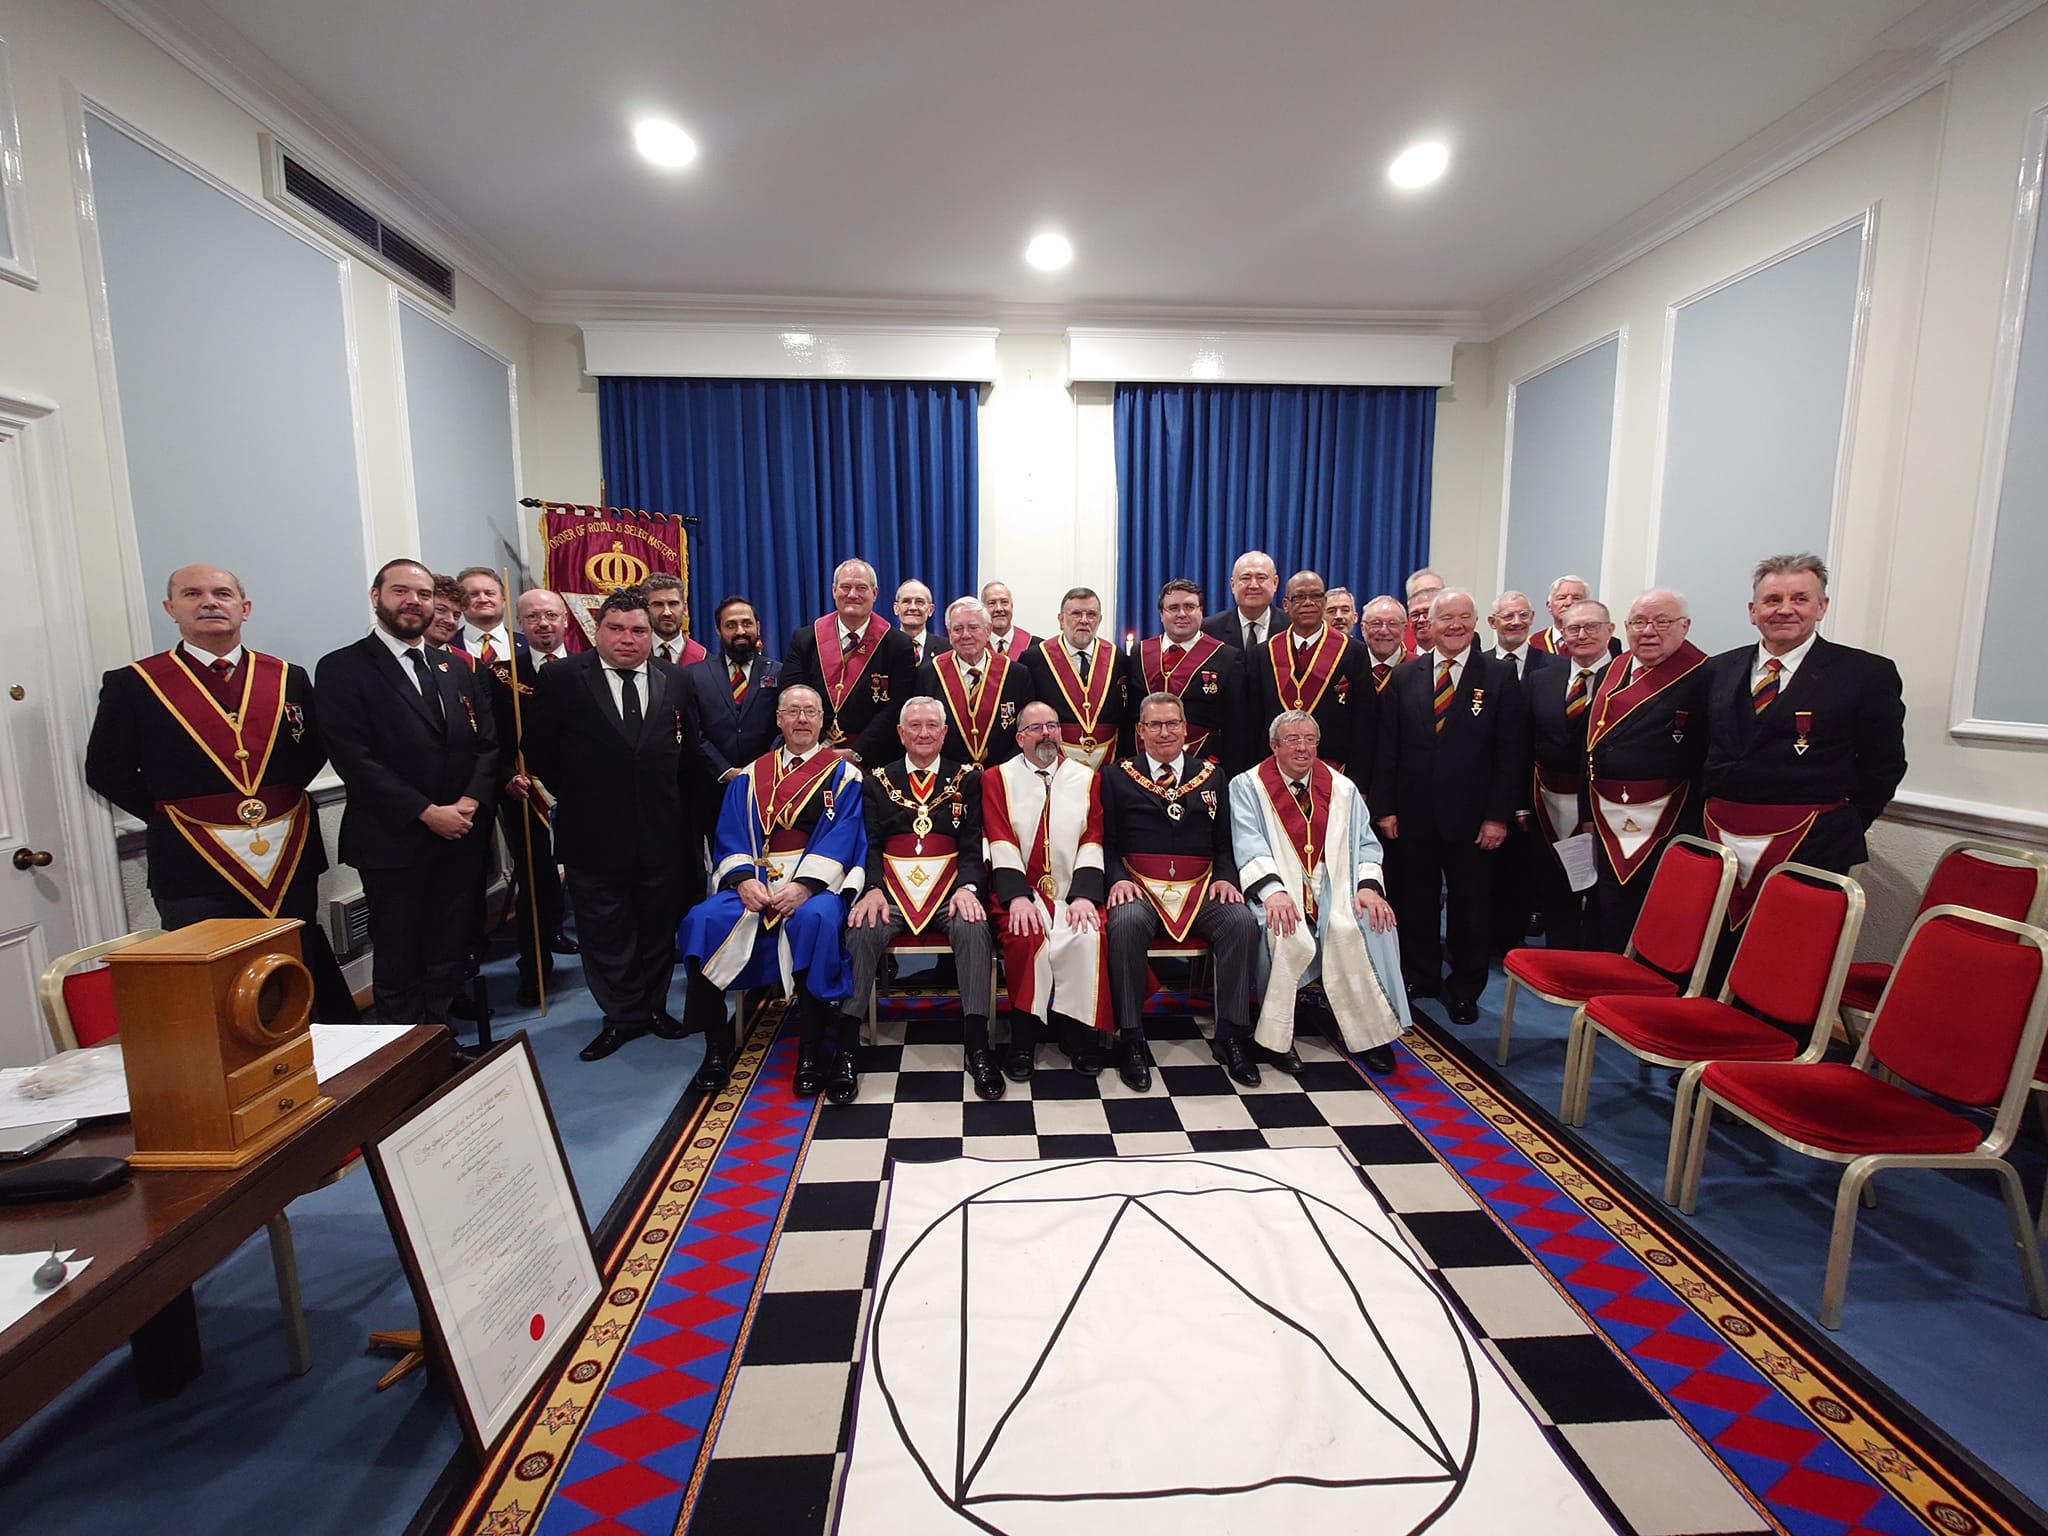 A Spendid evening with the Grand Master's Council T.I